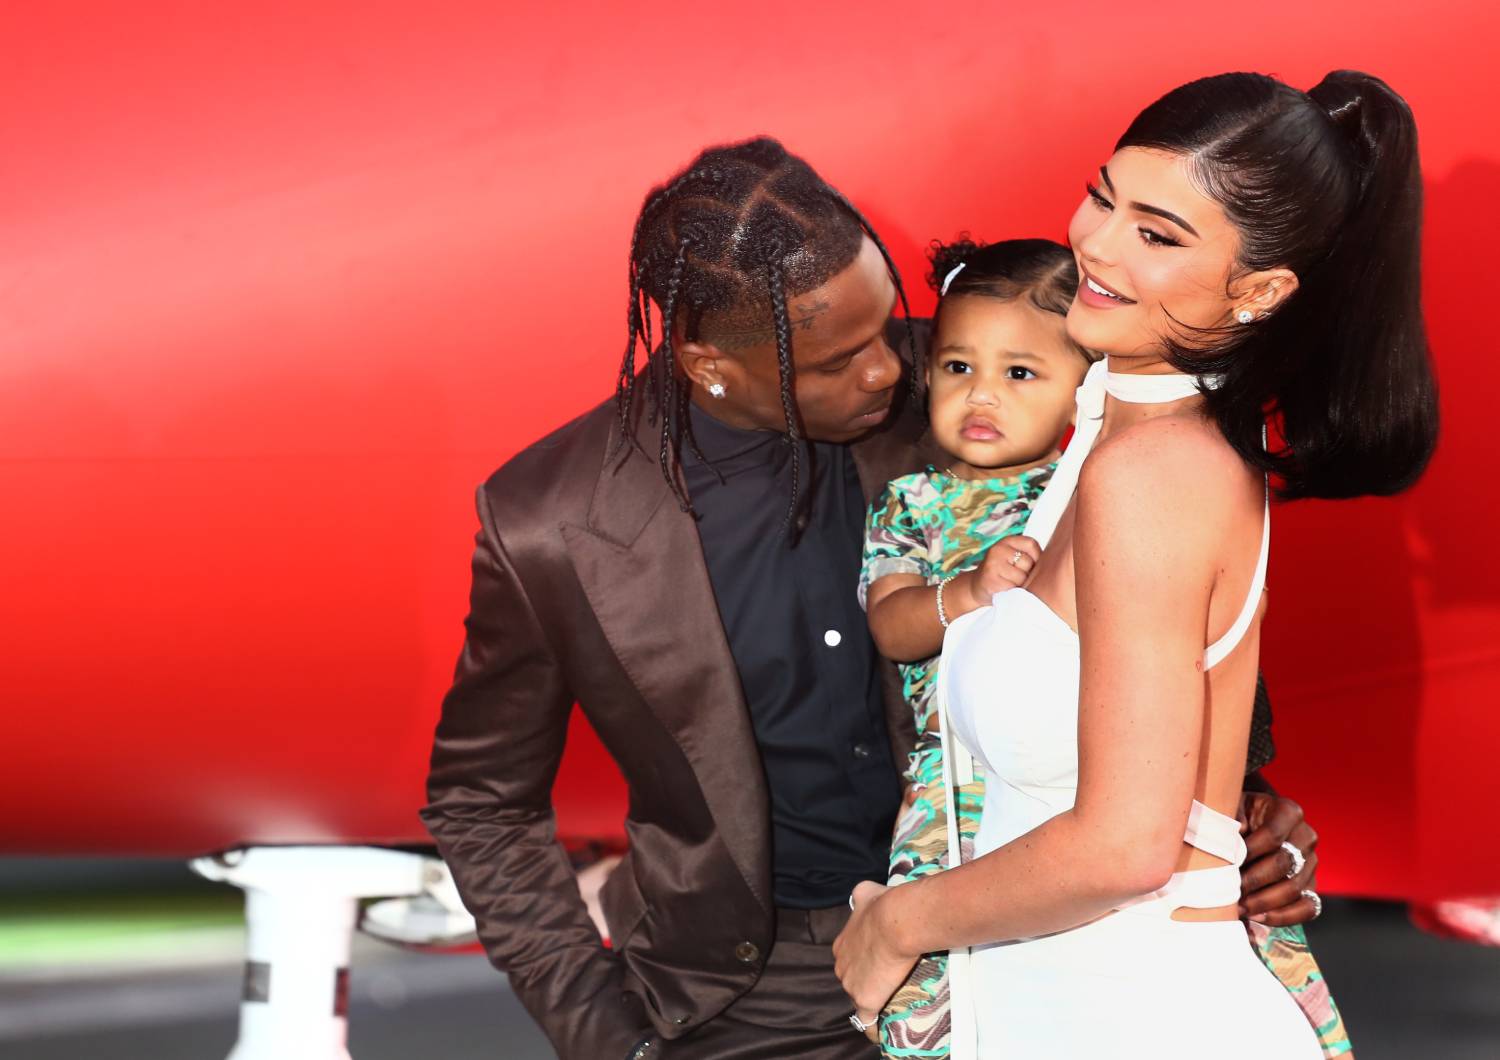  Travis Scott and Kylie Jenner attend the Travis Scott: "Look Mom I Can Fly" Los Angeles Premiere at The Barker Hanger on August 27, 2019 in Santa Monica, California. 